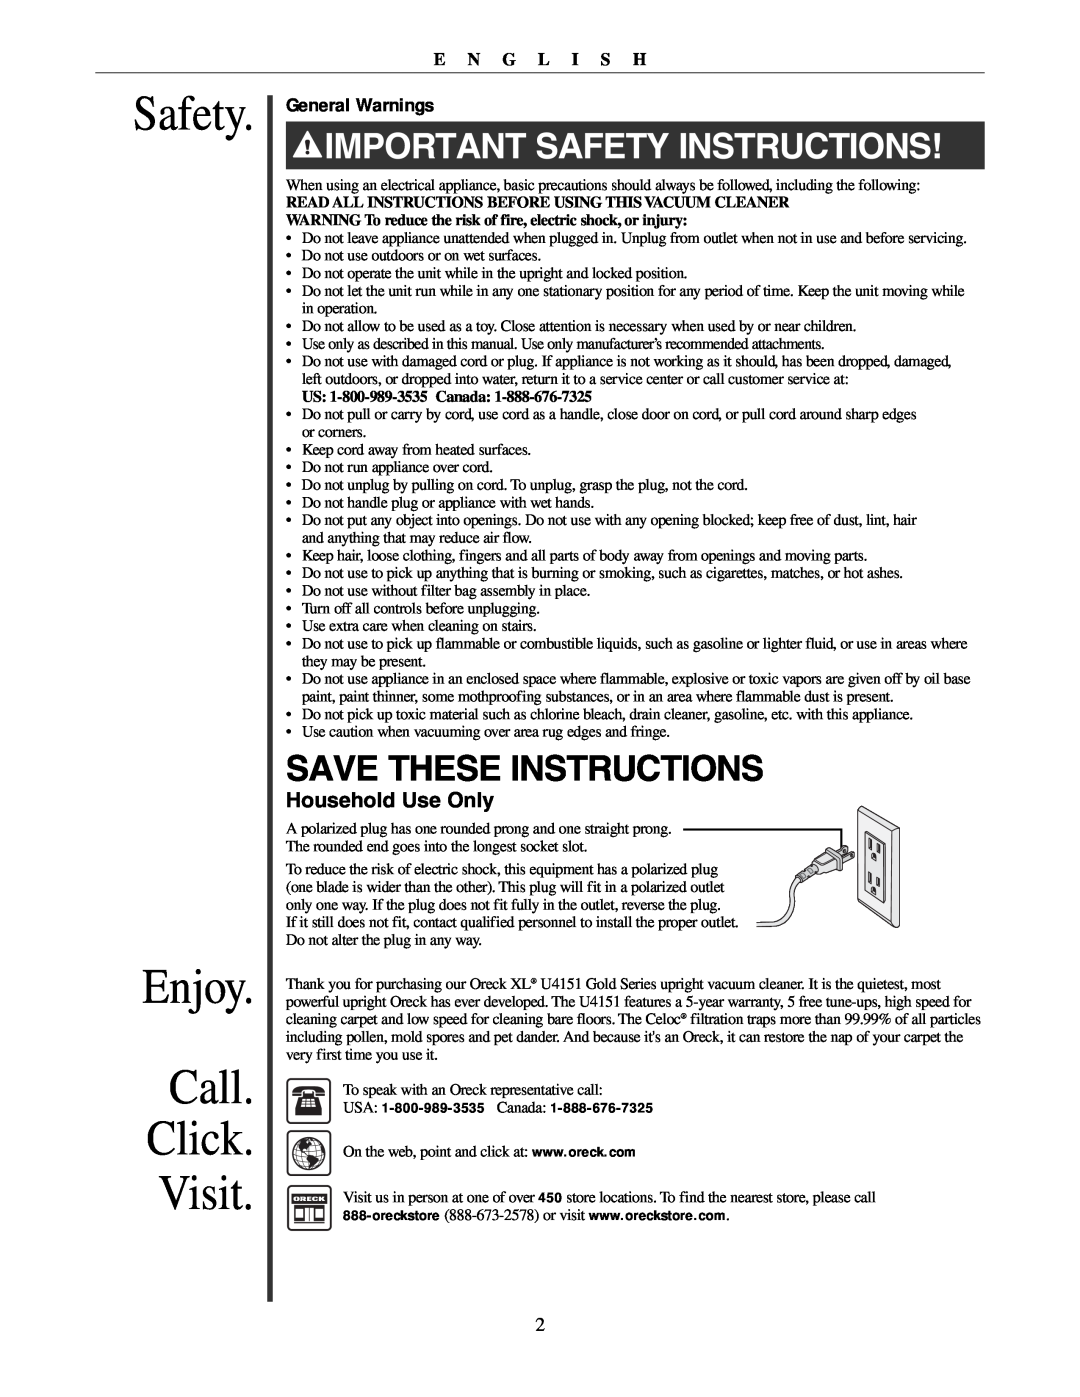 Oreck U4151 Safety Enjoy Call Click Visit, Save These Instructions, General Warnings, Household Use Only, E N G L I S H 